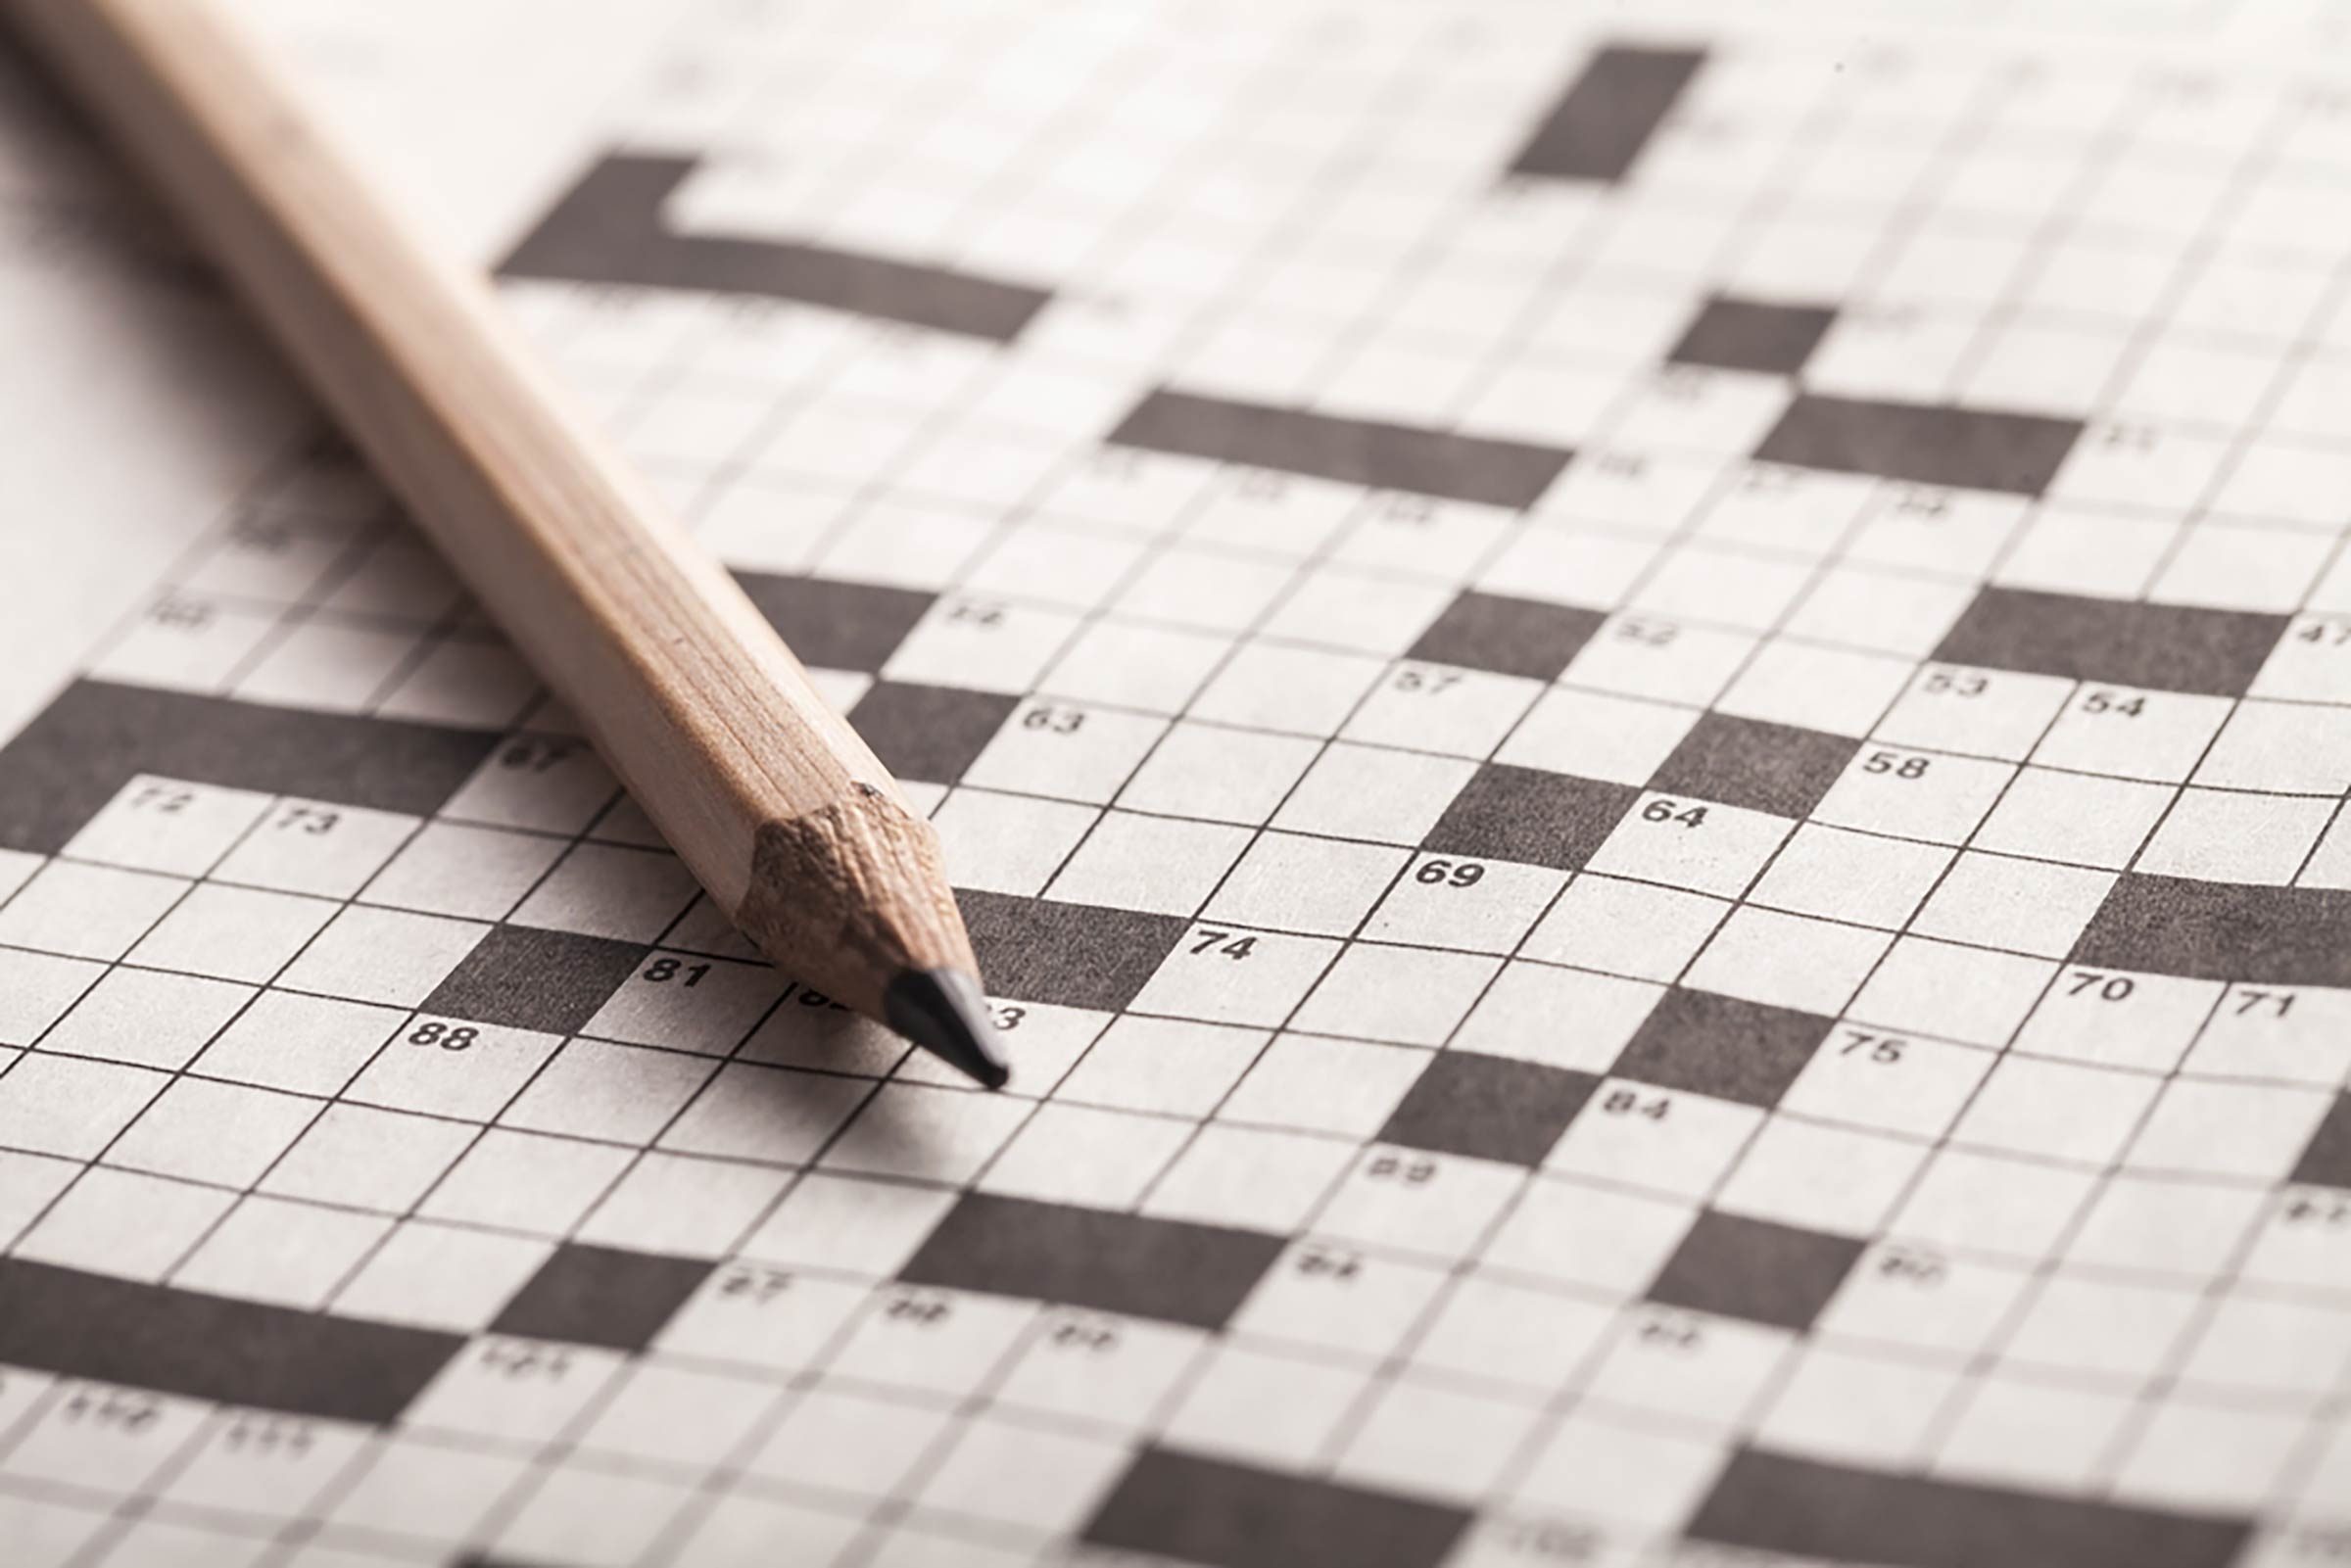 Brain games: Crossword puzzles and artistic hobbies can lower